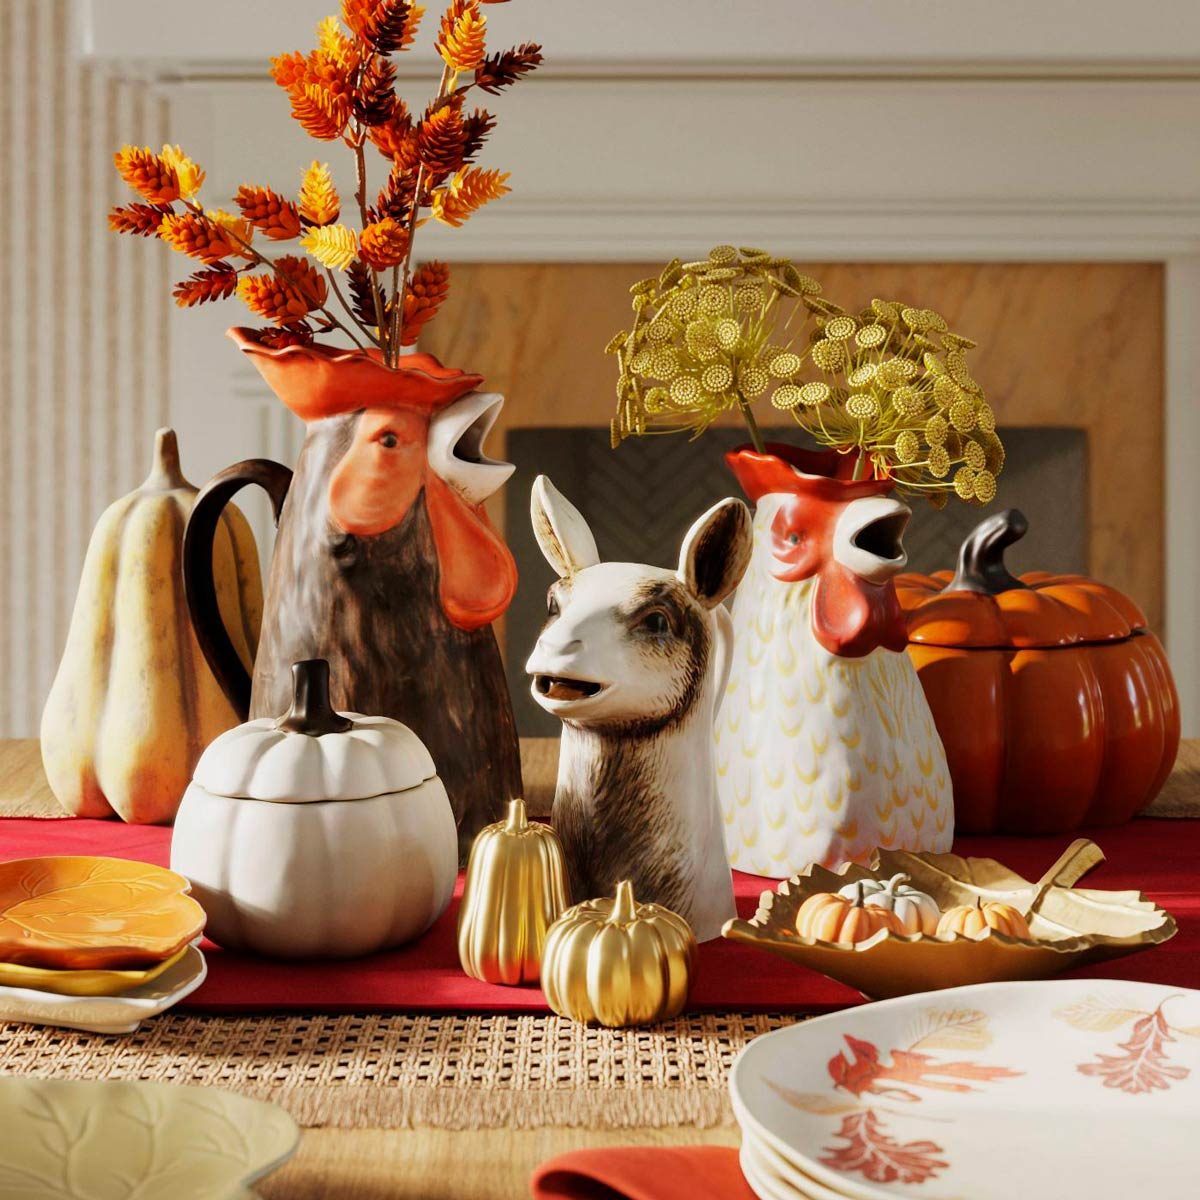 Target Has Released Its New Fall Home Decor Collections for 2019